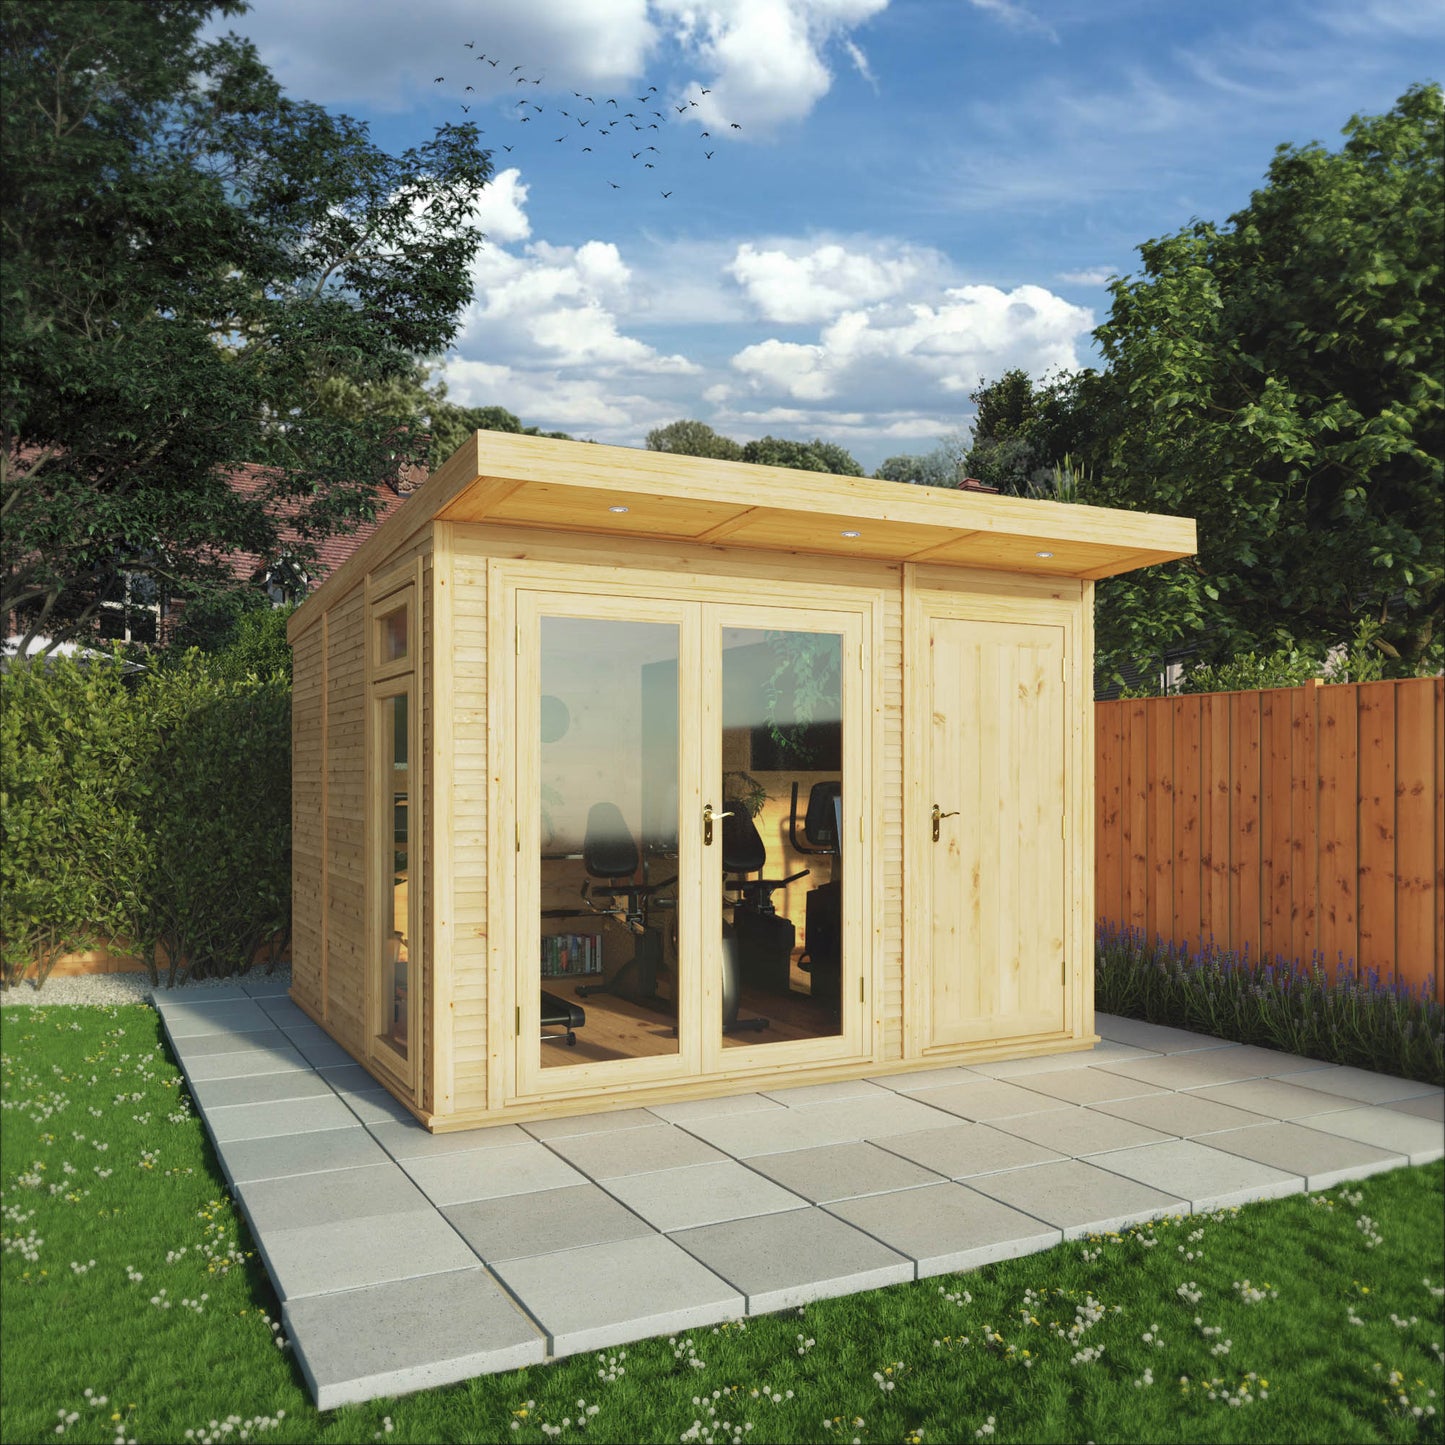 3 x 3m Insulated Garden Room with Side Shed